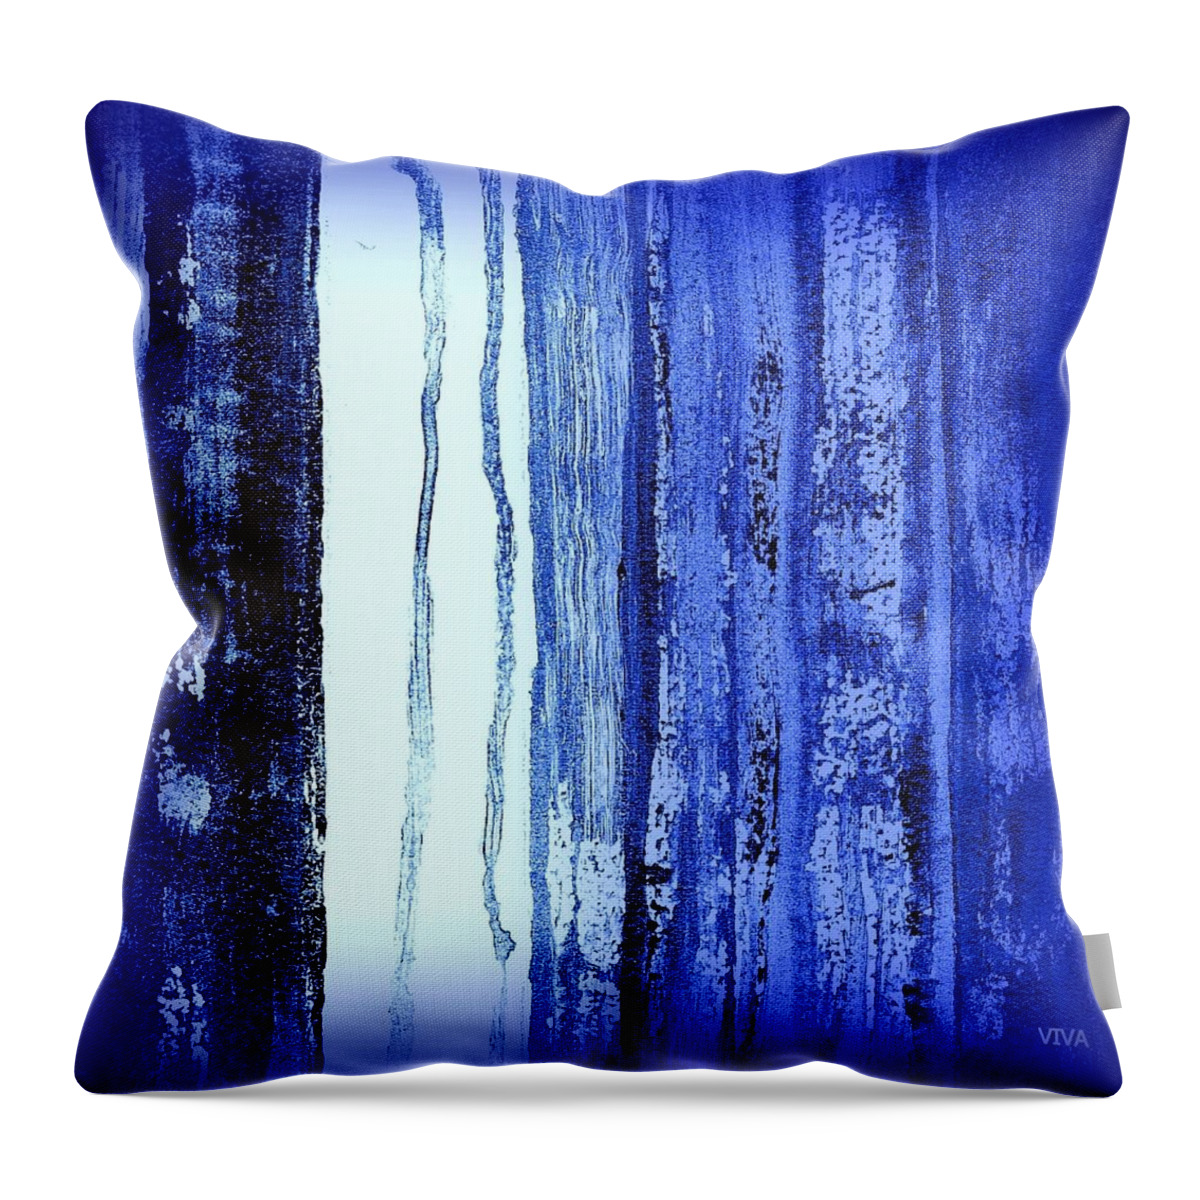 Rainy Throw Pillow featuring the painting Blue and White Rainy Day by VIVA Anderson